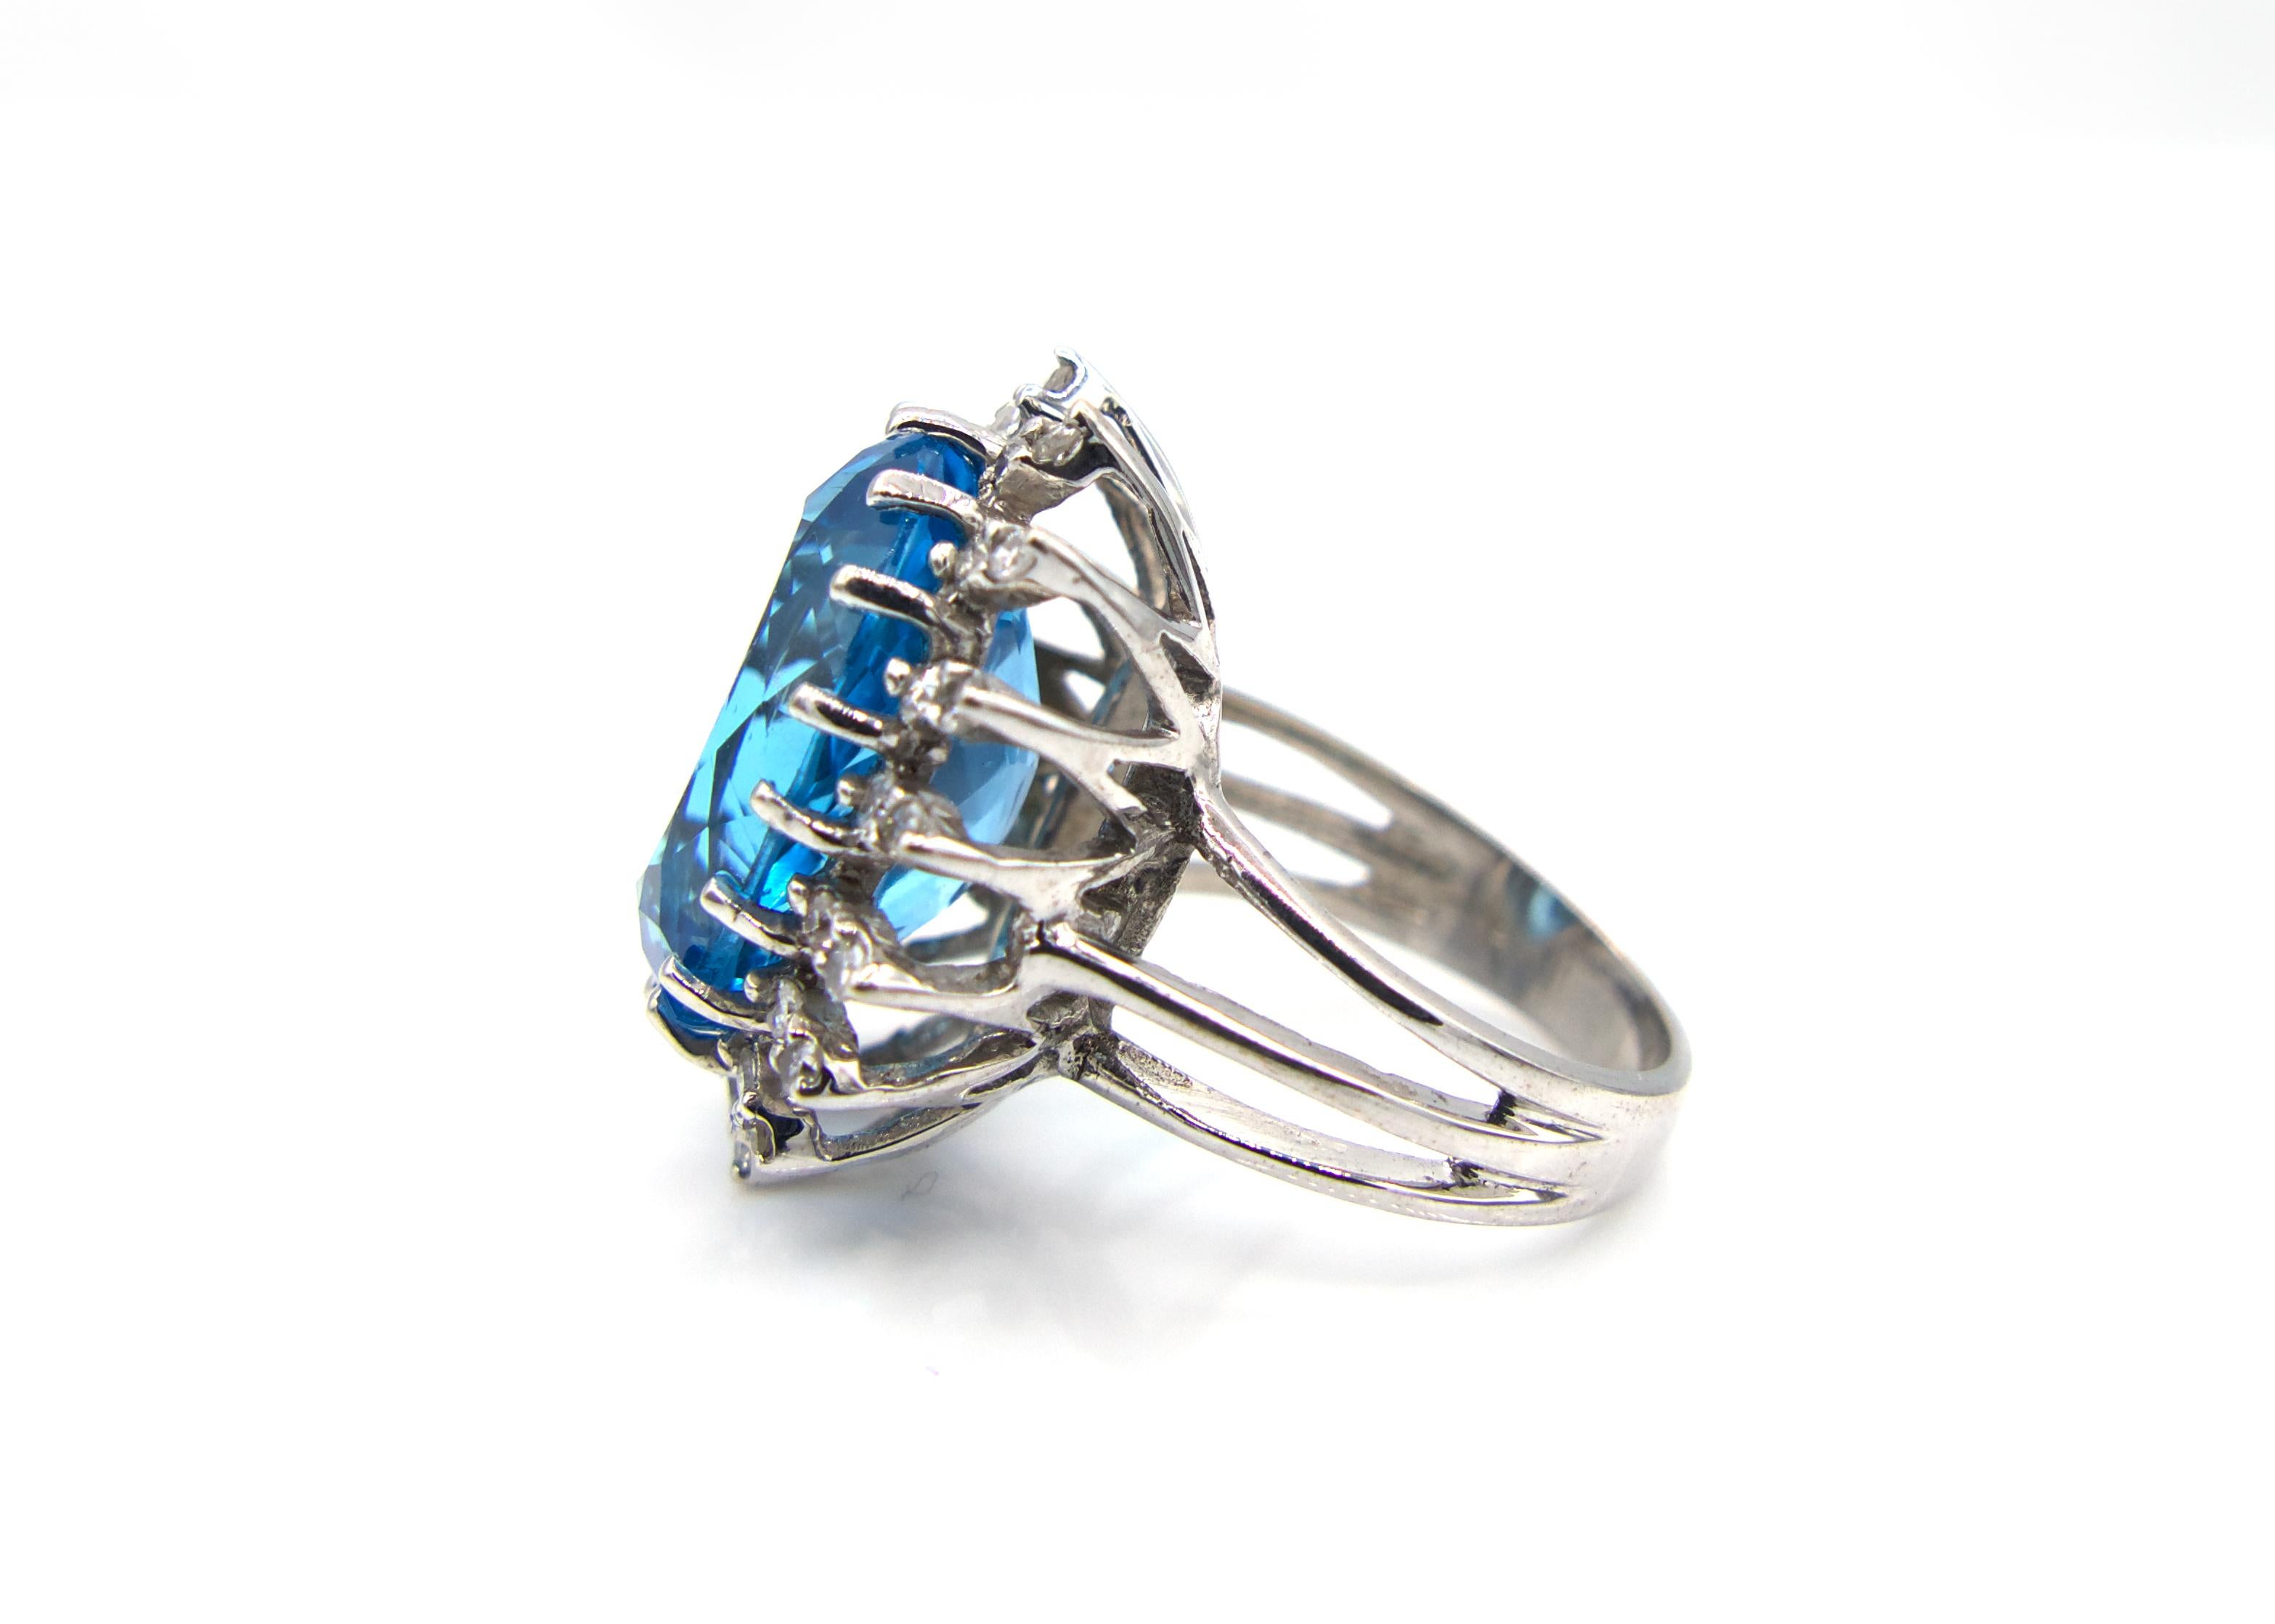 This spectacular 1950s ring features a large oval Blue Topaz center stone that weighs in at 20 Carats with 32 single round-cut diamond clusters, weighing at 1 Carat total, surrounding it on a vintage setting. The classic open cage band is made of